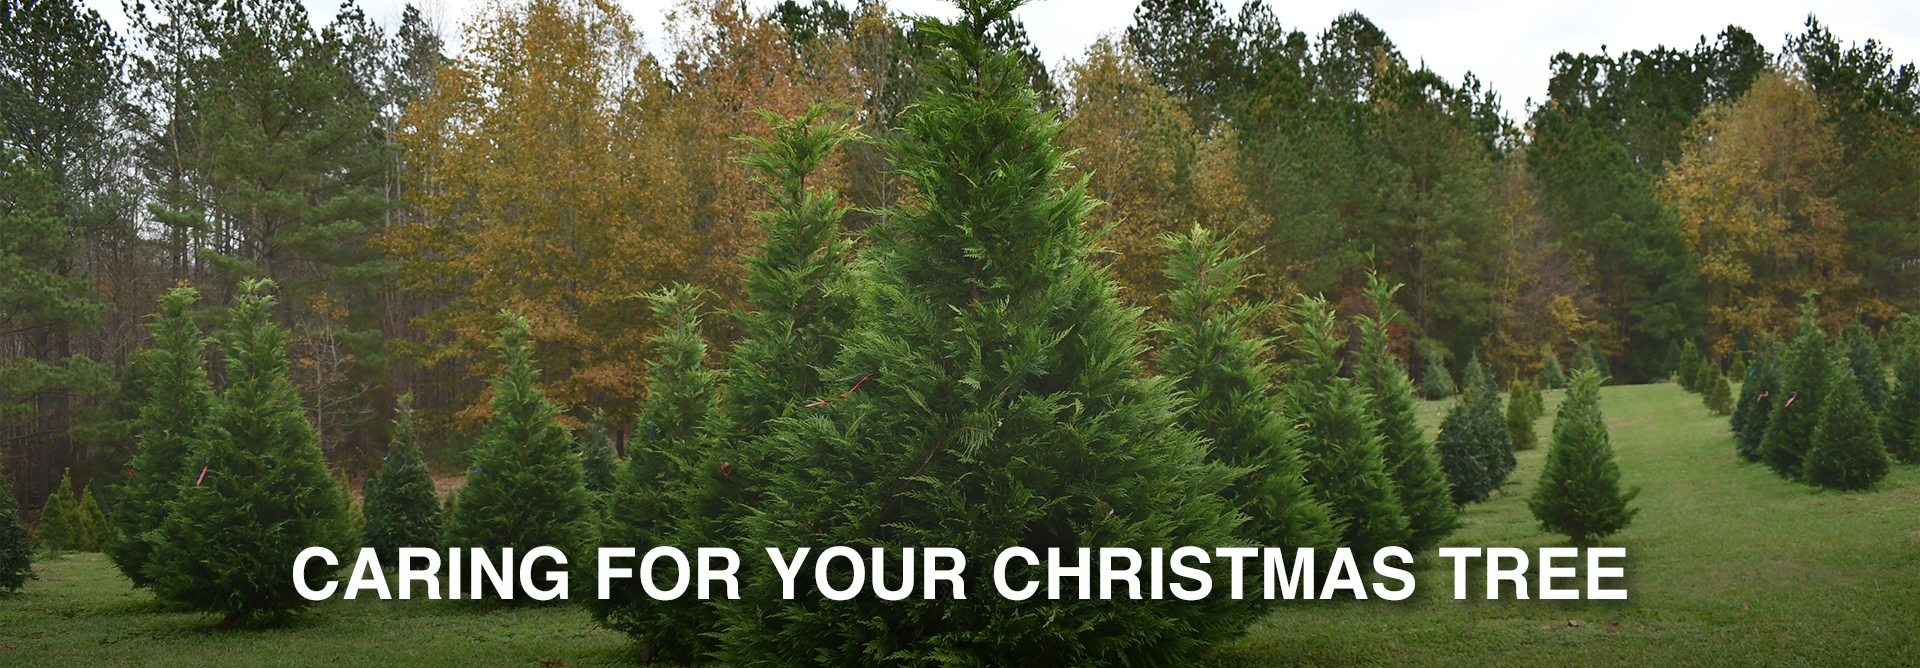 Caring for your Christmas Tree